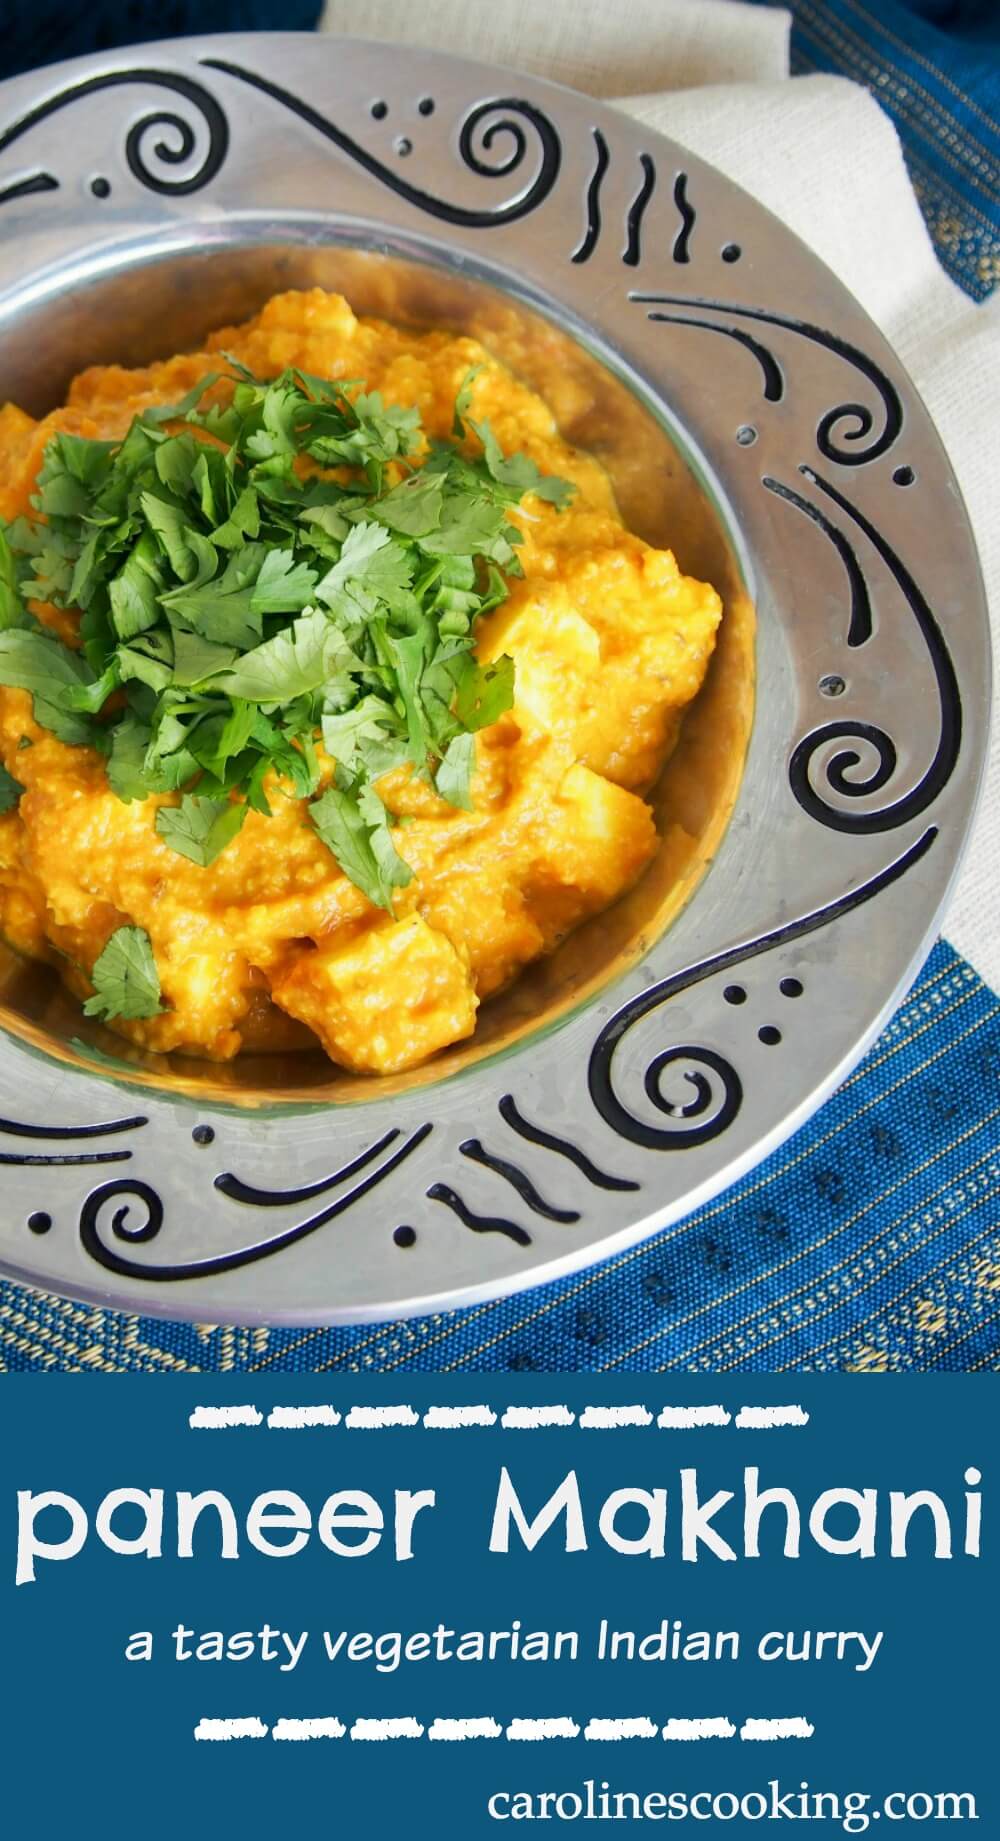 This tasty paneer Makhani is made with tomatoes, cream, cashews and spices.  Quick to make and thoroughly delicious, it's a vegetarian curry all will love.  #vegetarian #paneer #indian #curry